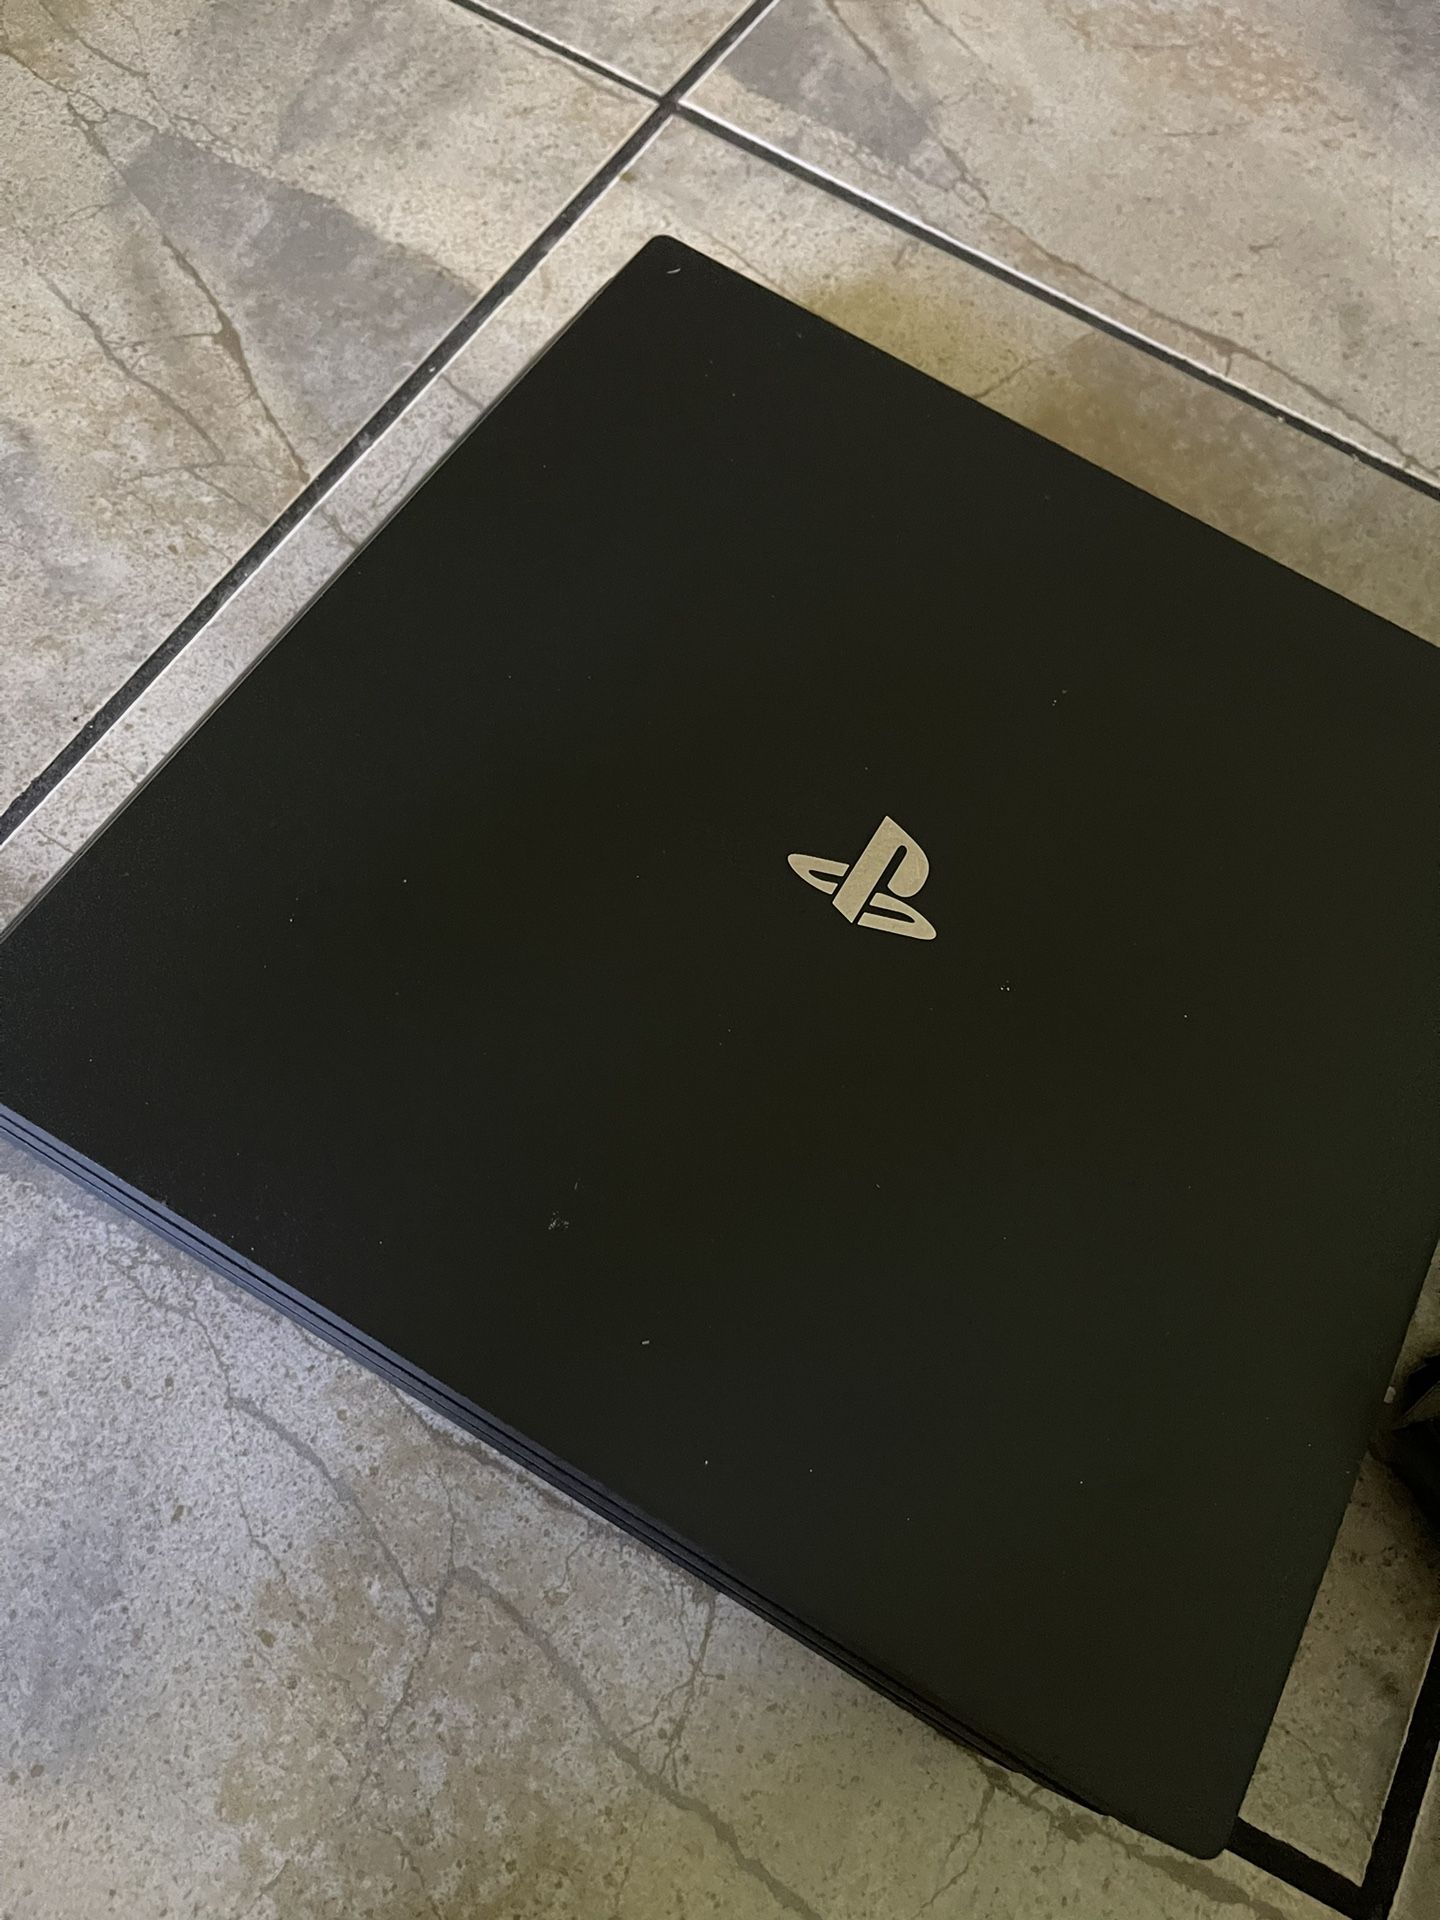 Selling Ps4 Pro 1tb Console 